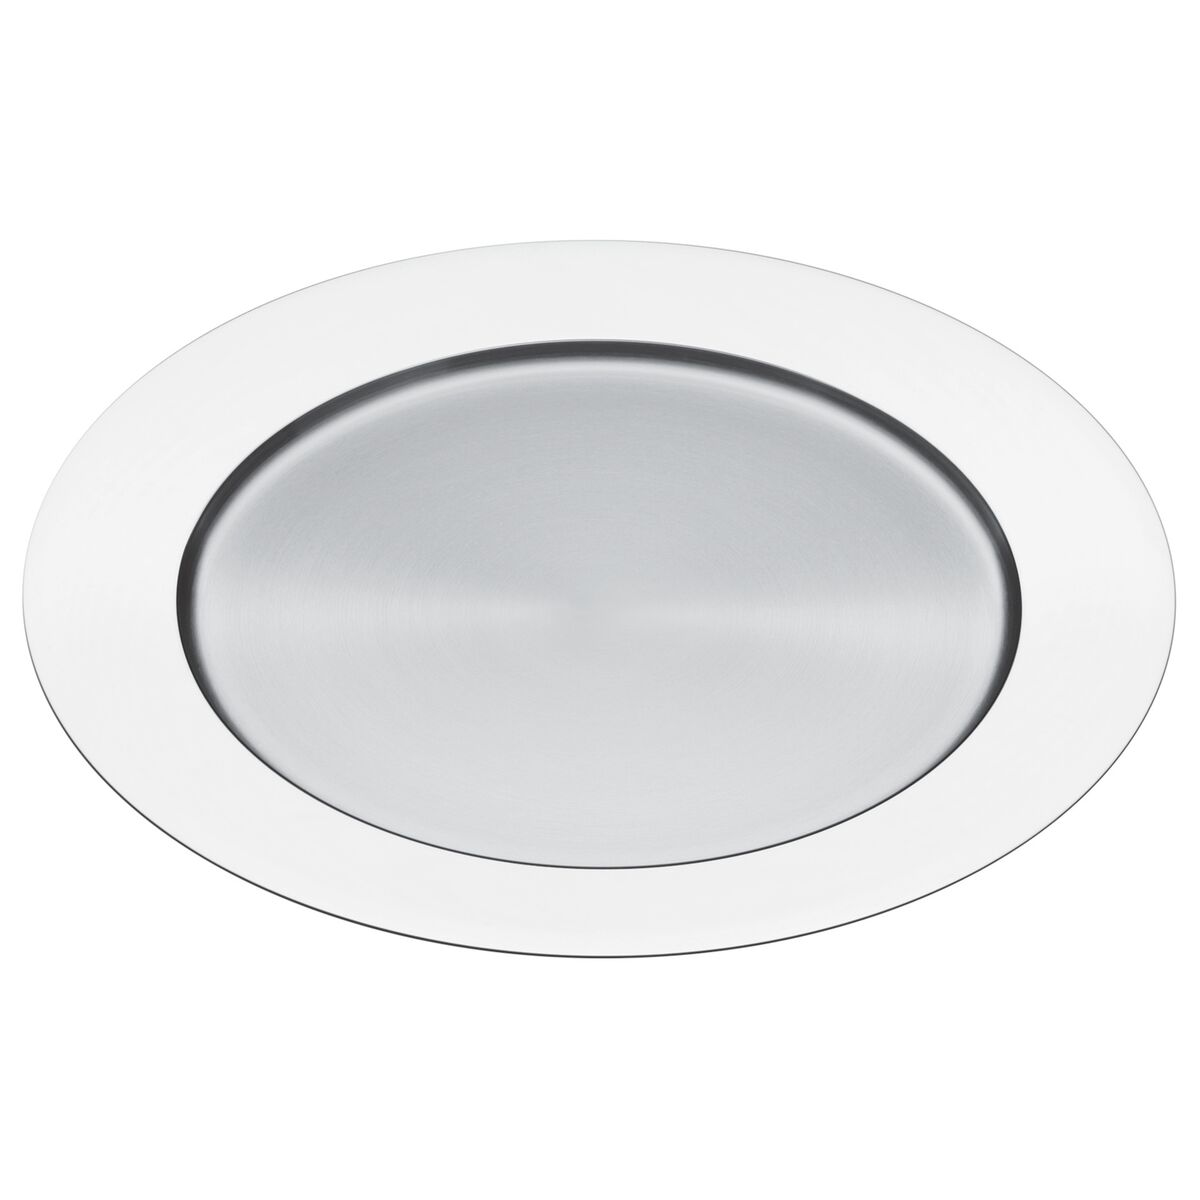 Tramontina Cosmos stainless steel service plate, 31.4 cm